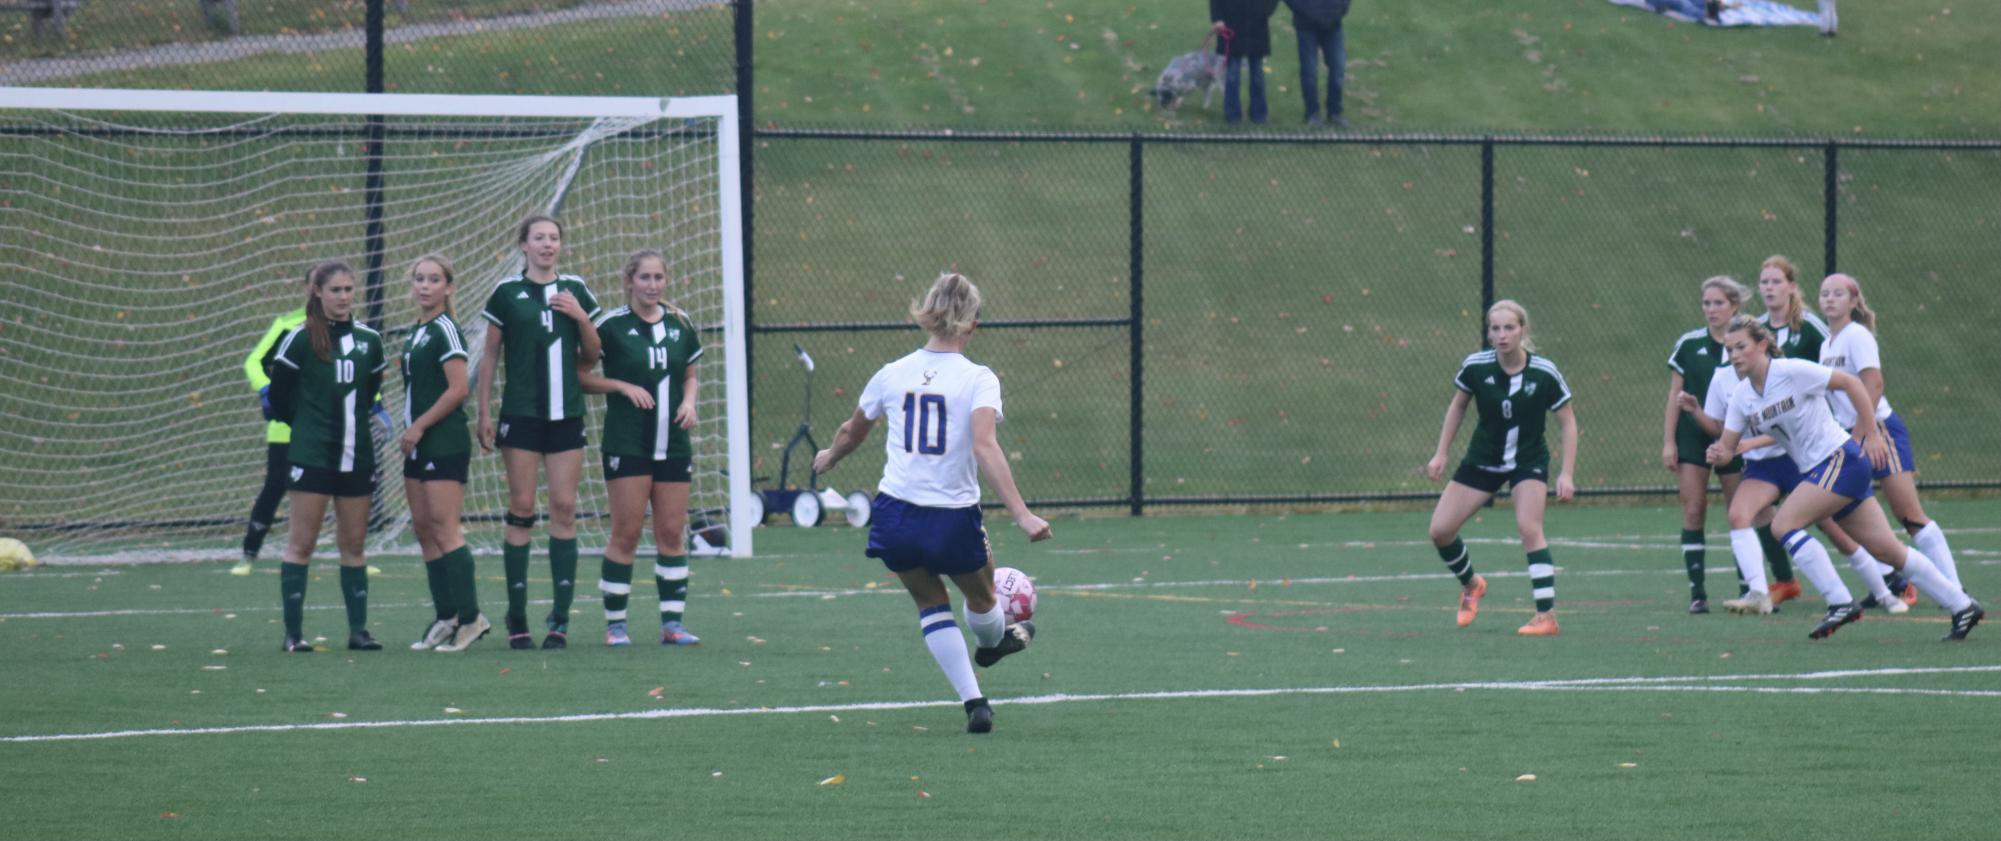 BMU senior Jordan Alley takes a direct kick, and drives it over the Enosburg defenders. 